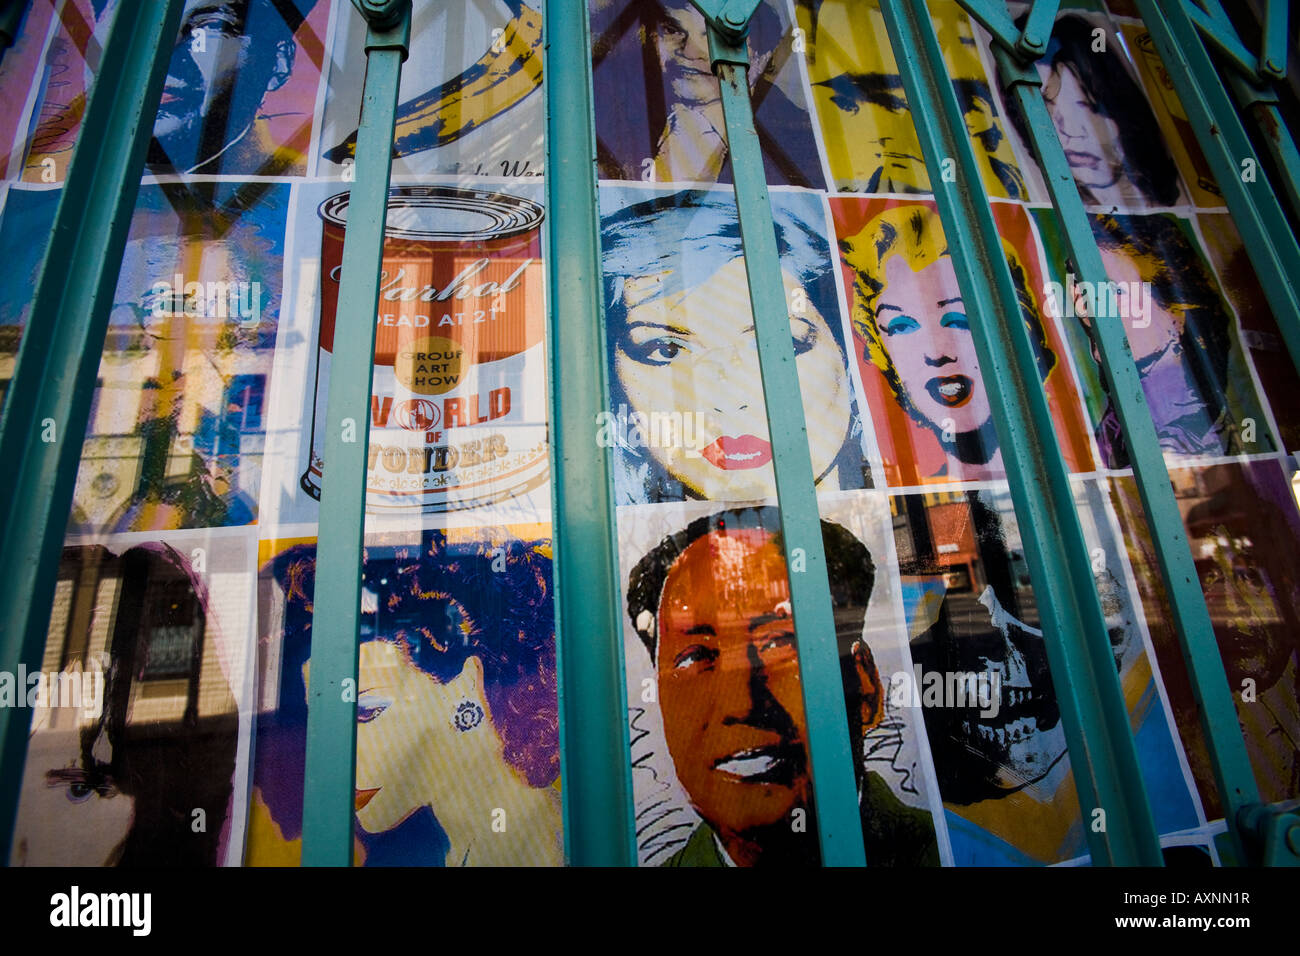 Shop window with Andy Warhol's images of Chairman Mao Marilyn Monroe etc Stock Photo